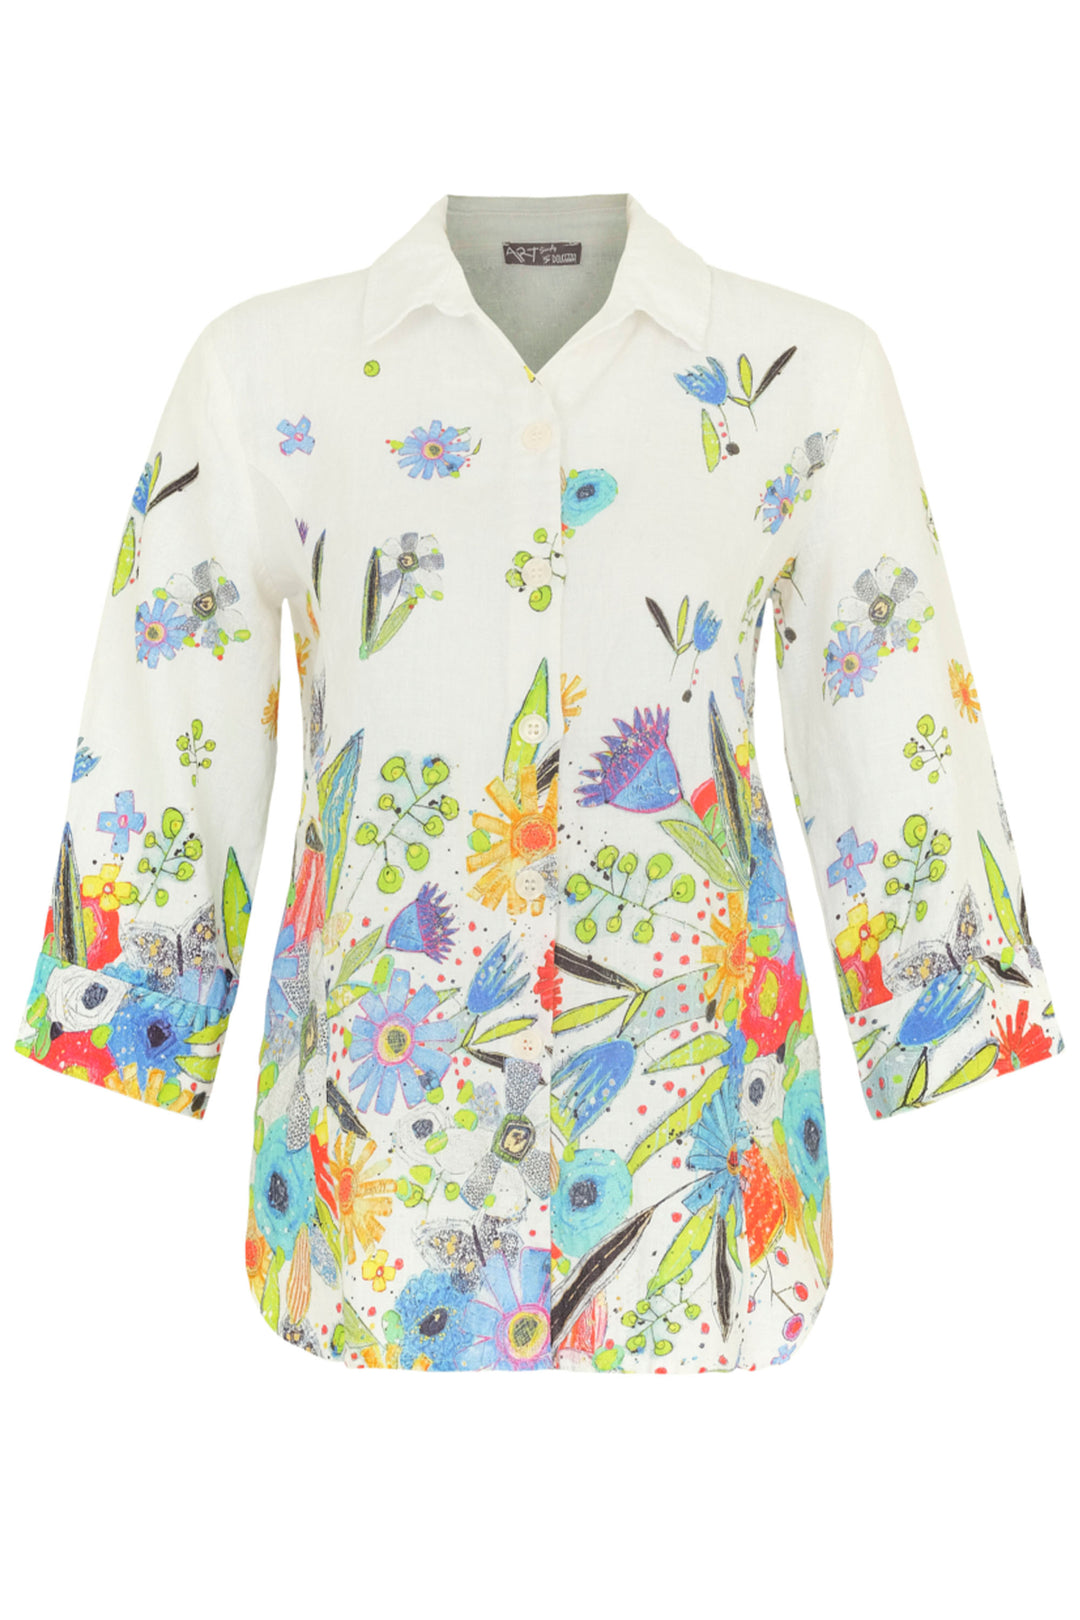 Dolcezza Spring 2024 With 3/4 dolman sleeves and a neat floral sping design, this blouse-style top is perfect for both casual and elegant occasions.